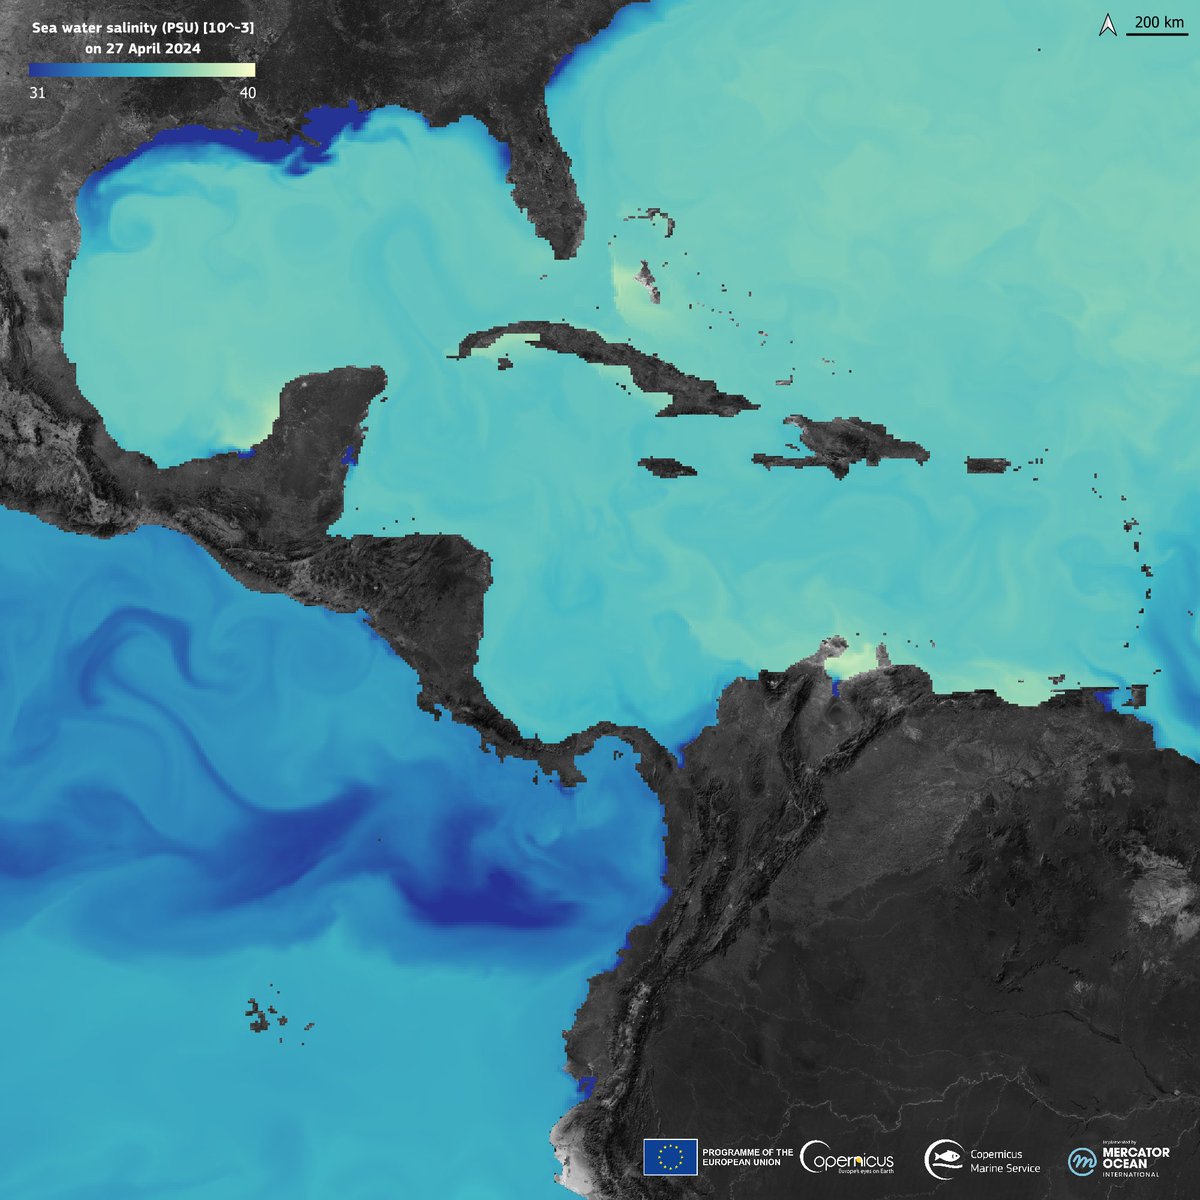 Central America 🌎 borders the Pacific Ocean to the west & the Caribbean Sea to the east

The Pacific generally receives more freshwater from rivers and has more rainfall, leading to lower average salinity📉

⬇️Water salinity on 27 April, visualised using #CopernicusMarine data